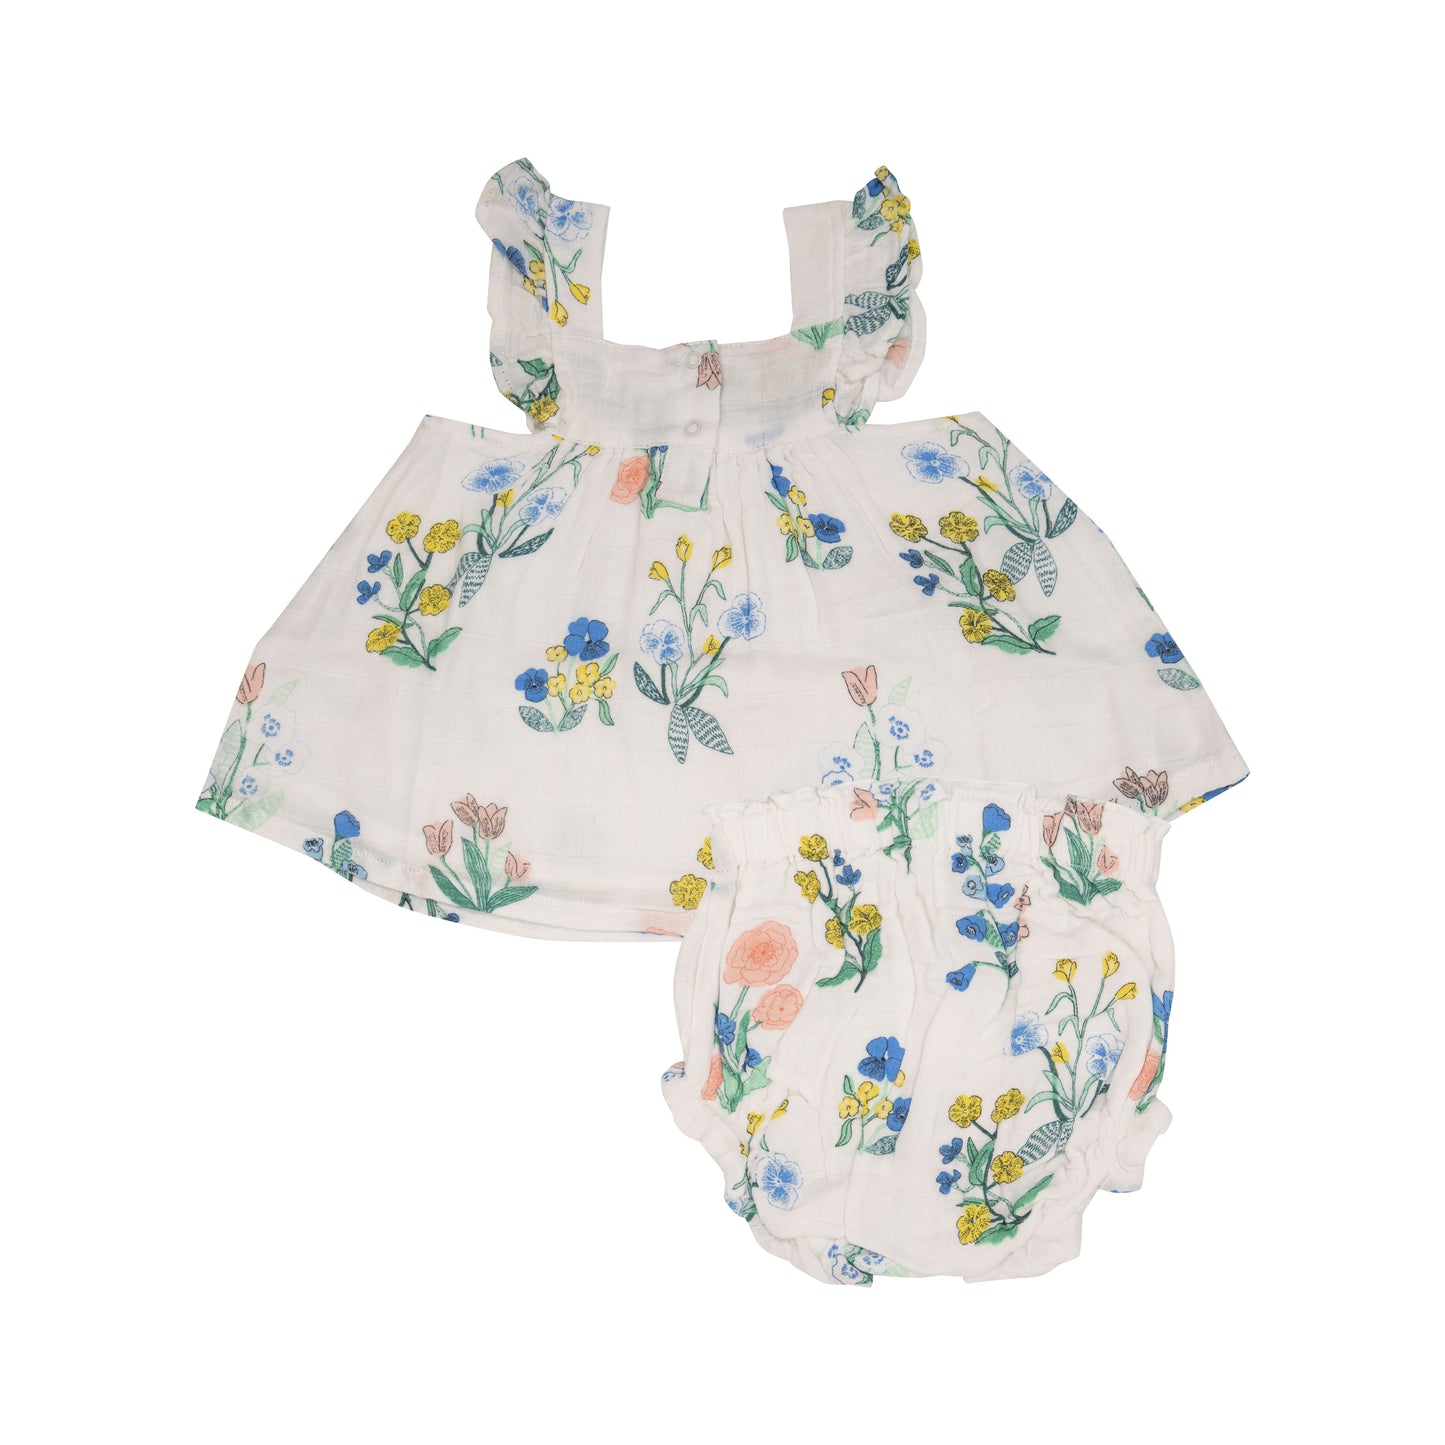 Butterfly Sleeve Pinafore Top & Bloomer, Urban Floral